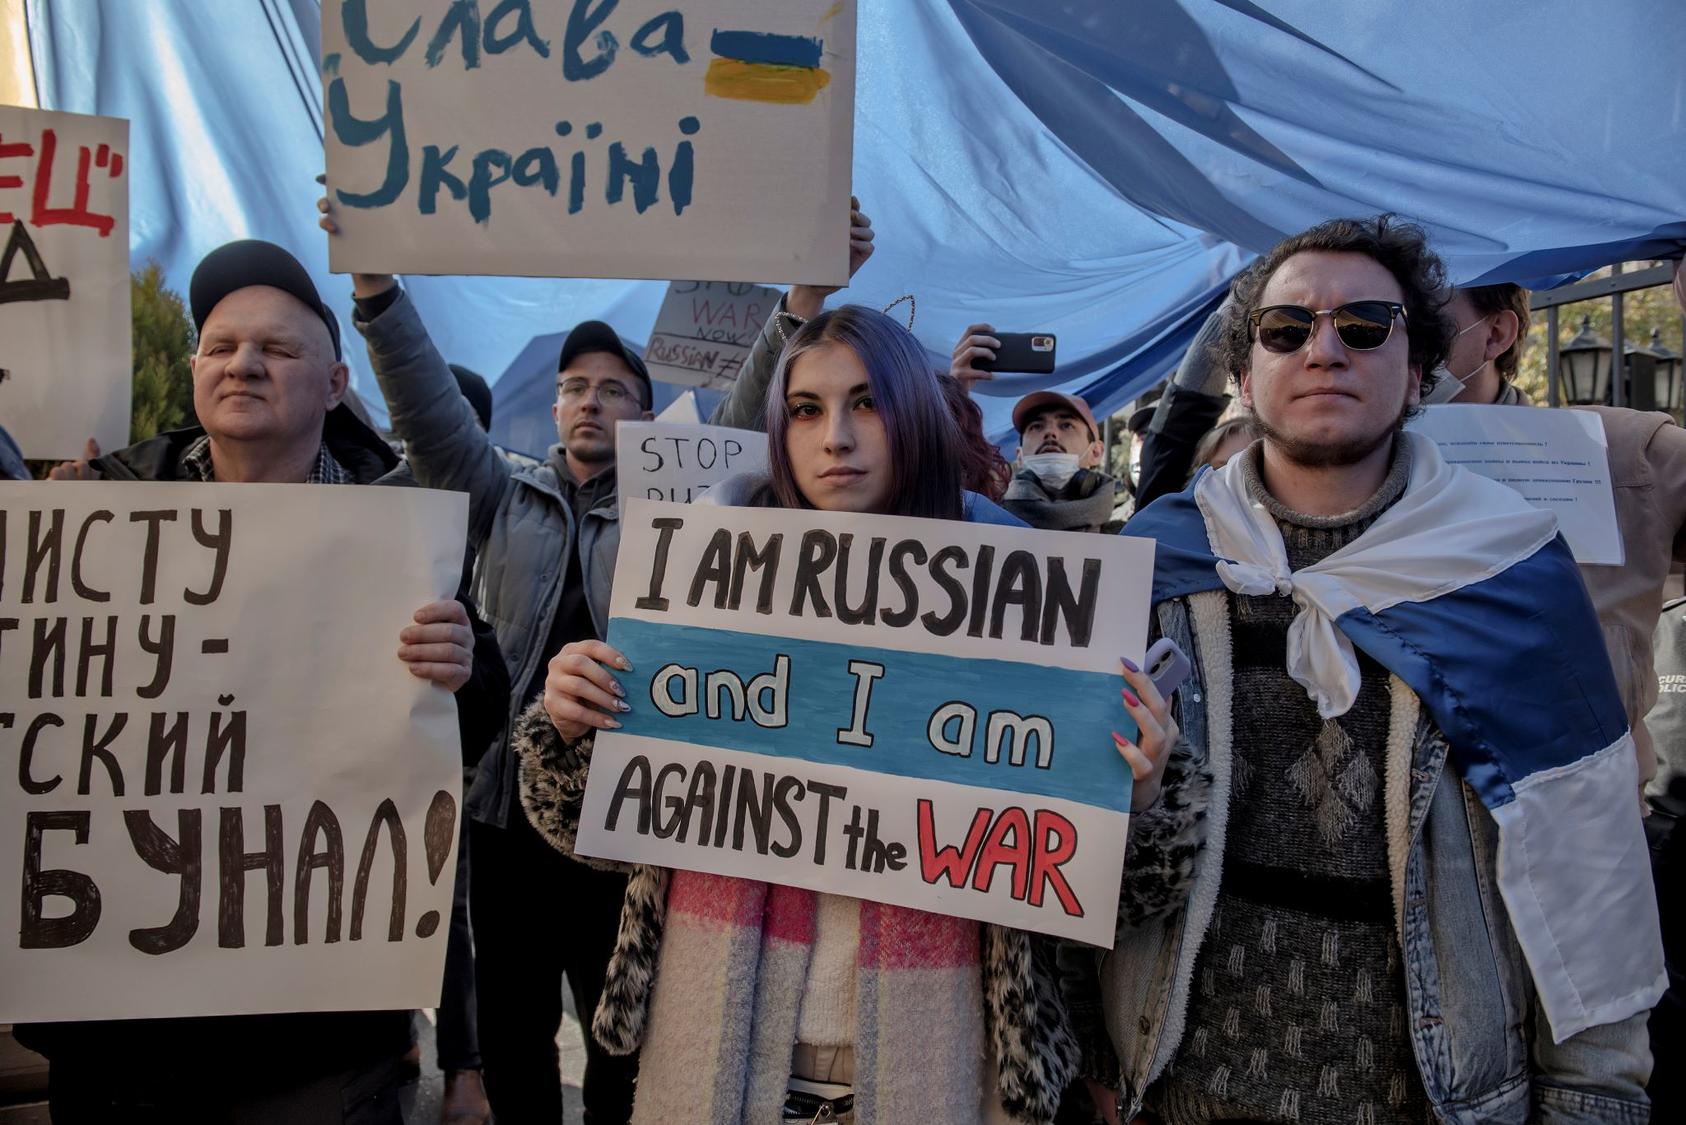 A protest against the war in Ukraine, in Tbilisi, Georgia, where 20,000 Russians have arrived since the start of the war in Ukraine, March 12, 2022. (Laetitia Vancon/The New York Times)